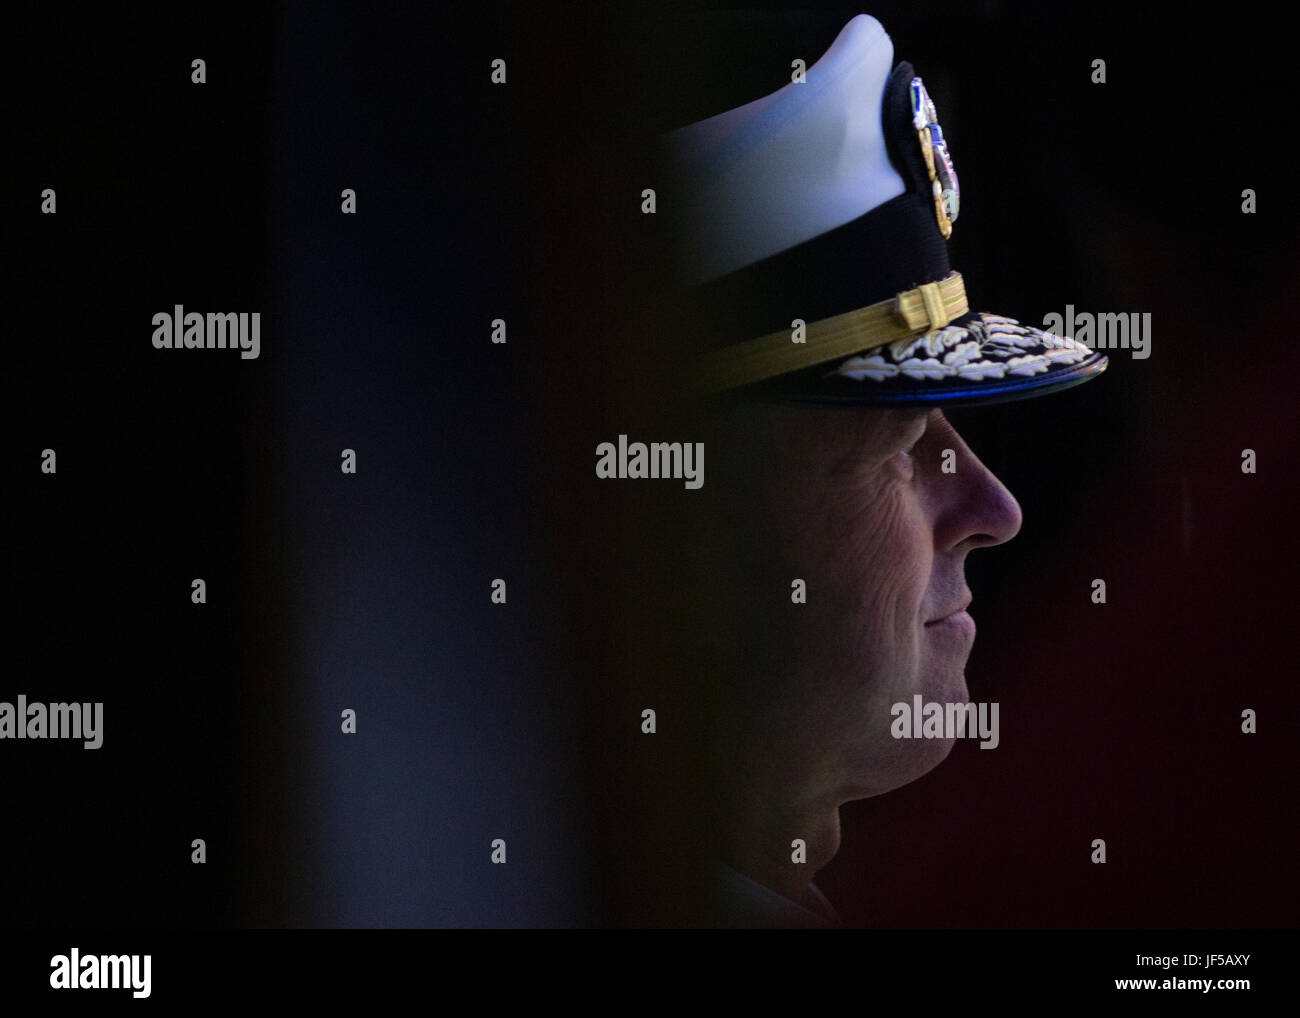 Navy Adm. John M. Richardson, Chief of Naval Operations, waits backstage at the National Memorial Day Concert at the west lawn of the U.S. Capitol, Washington, D.C., May 28, 2017. The concert’s mission is to unite the country in remembrance and appreciation of the fallen and to serve those who are grieving. (Dept. of Defense photo by Navy Petty Officer 2nd Class Dominique A. Pineiro/Released) Stock Photo